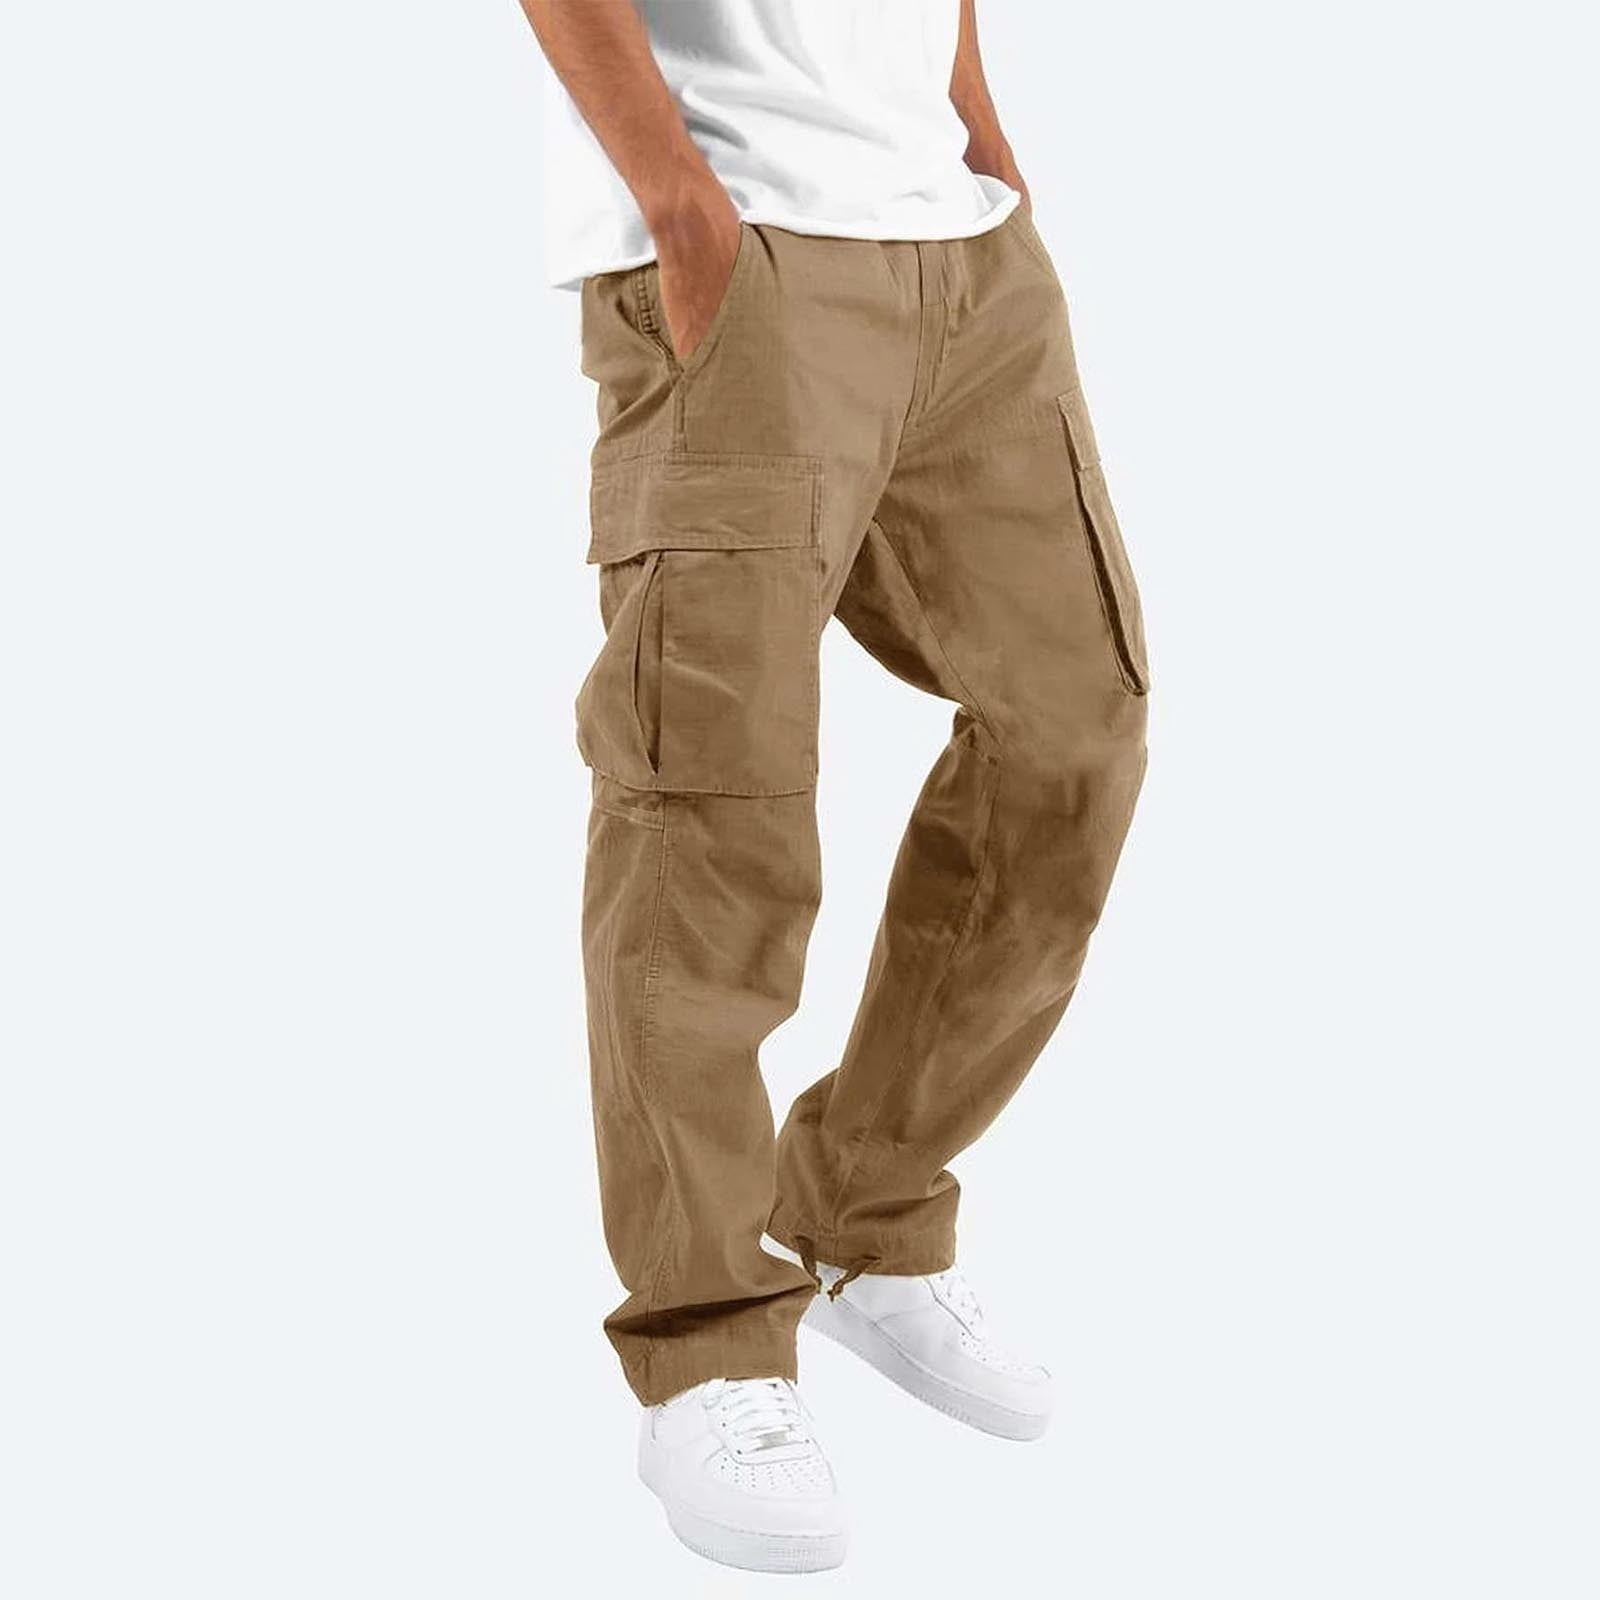 ZKCCNUK Cargo Pants for Men Solid Casual Multiple Pockets Outdoor Straight  Type Fitness Pants Cargo Pants Trousers Khaki XXL on Clearance